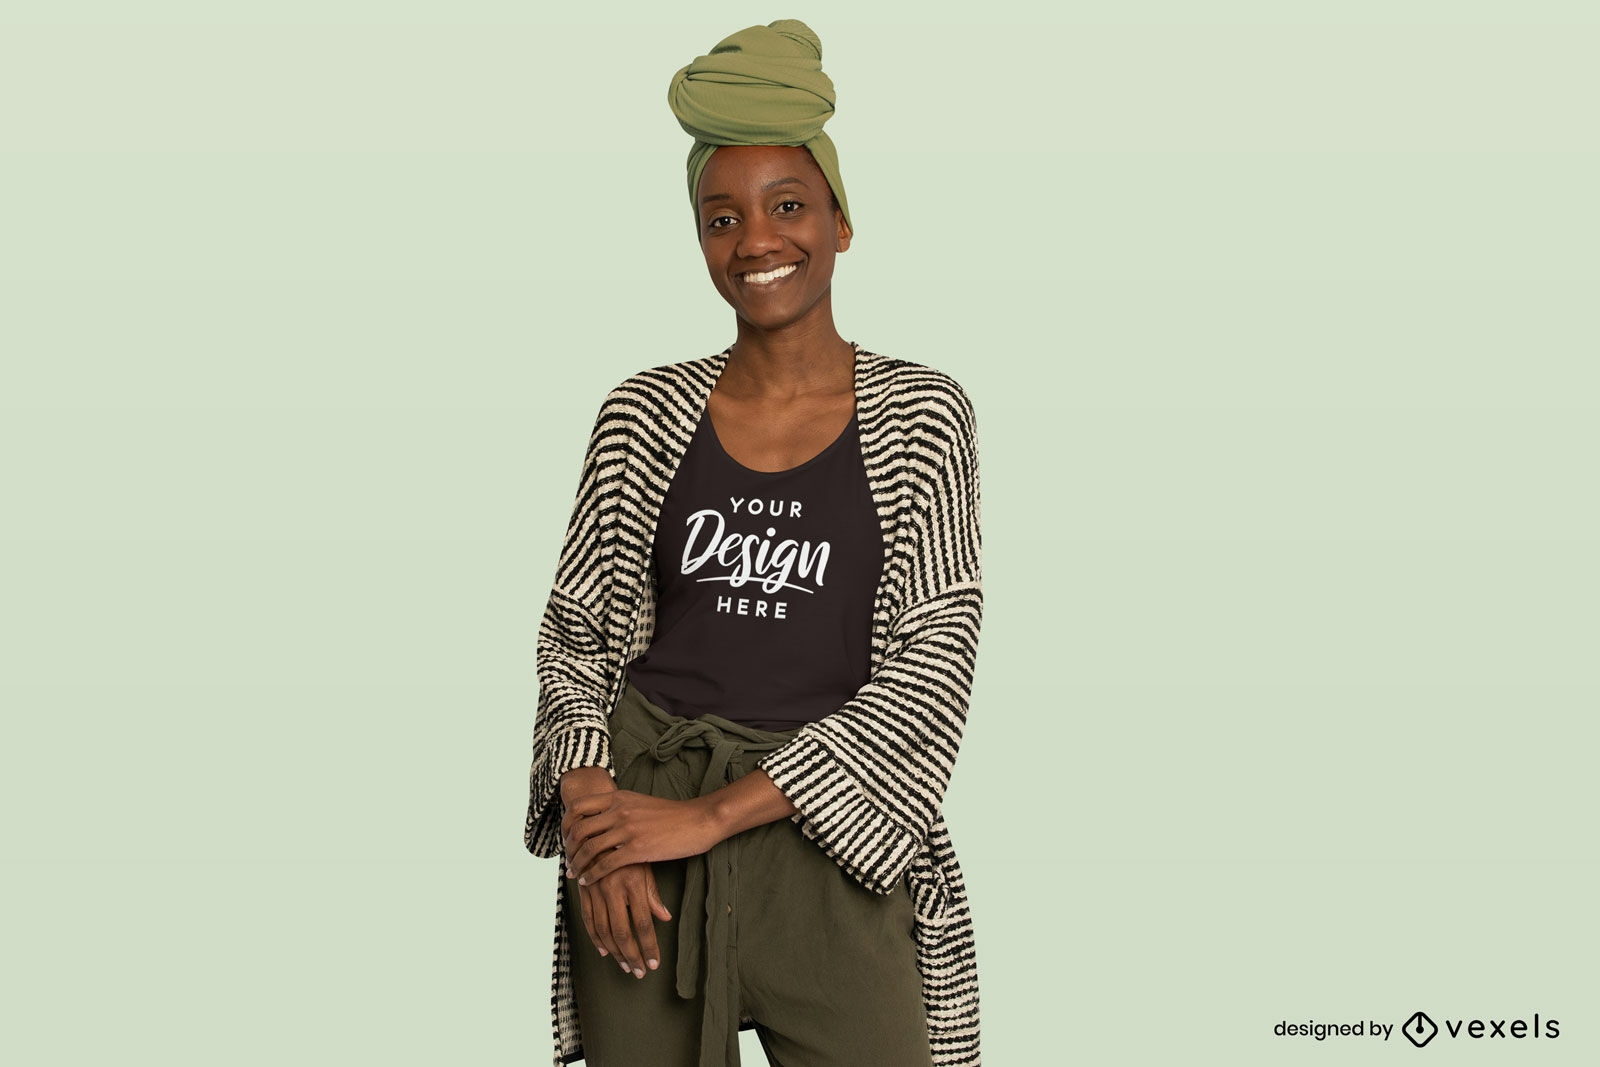 Black girl with headscarf and t-shirt mockup